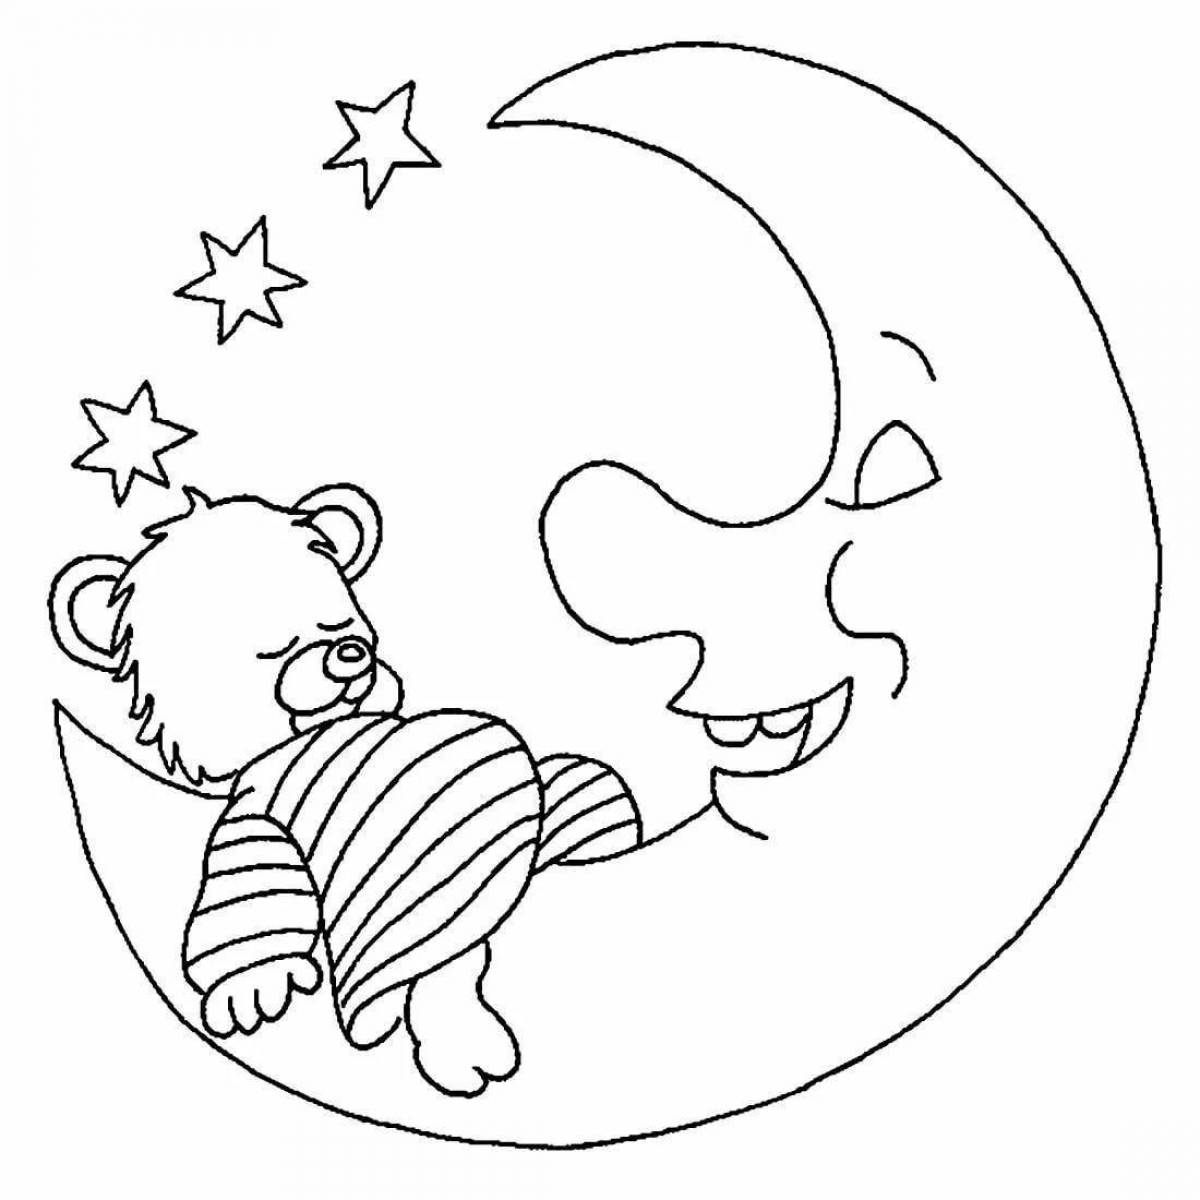 Animated bear on the moon coloring book